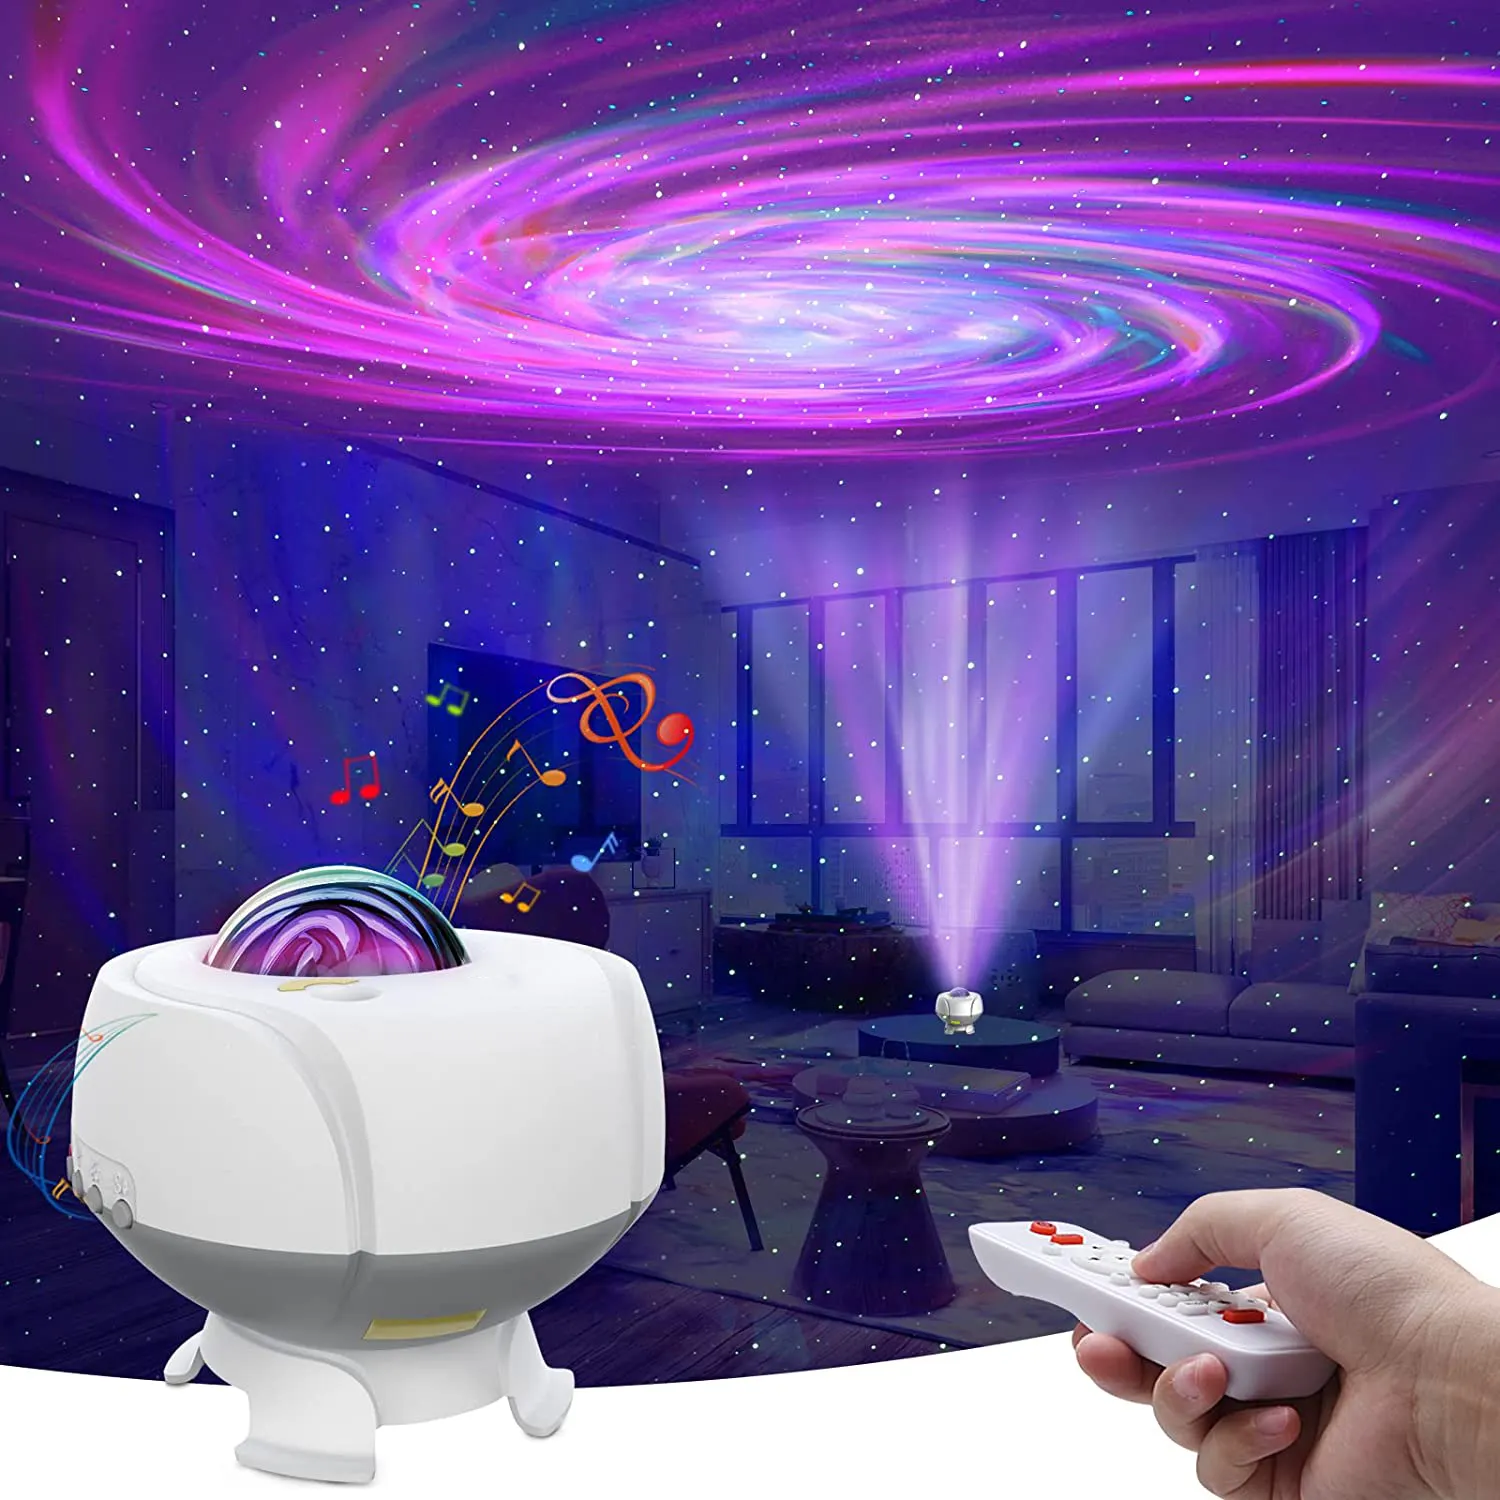 Galaxes Night Light Projector for Bedroom Karaoke Decor with Music Speaker Timer Skylight Projector Kids Christmas Birthday Gift